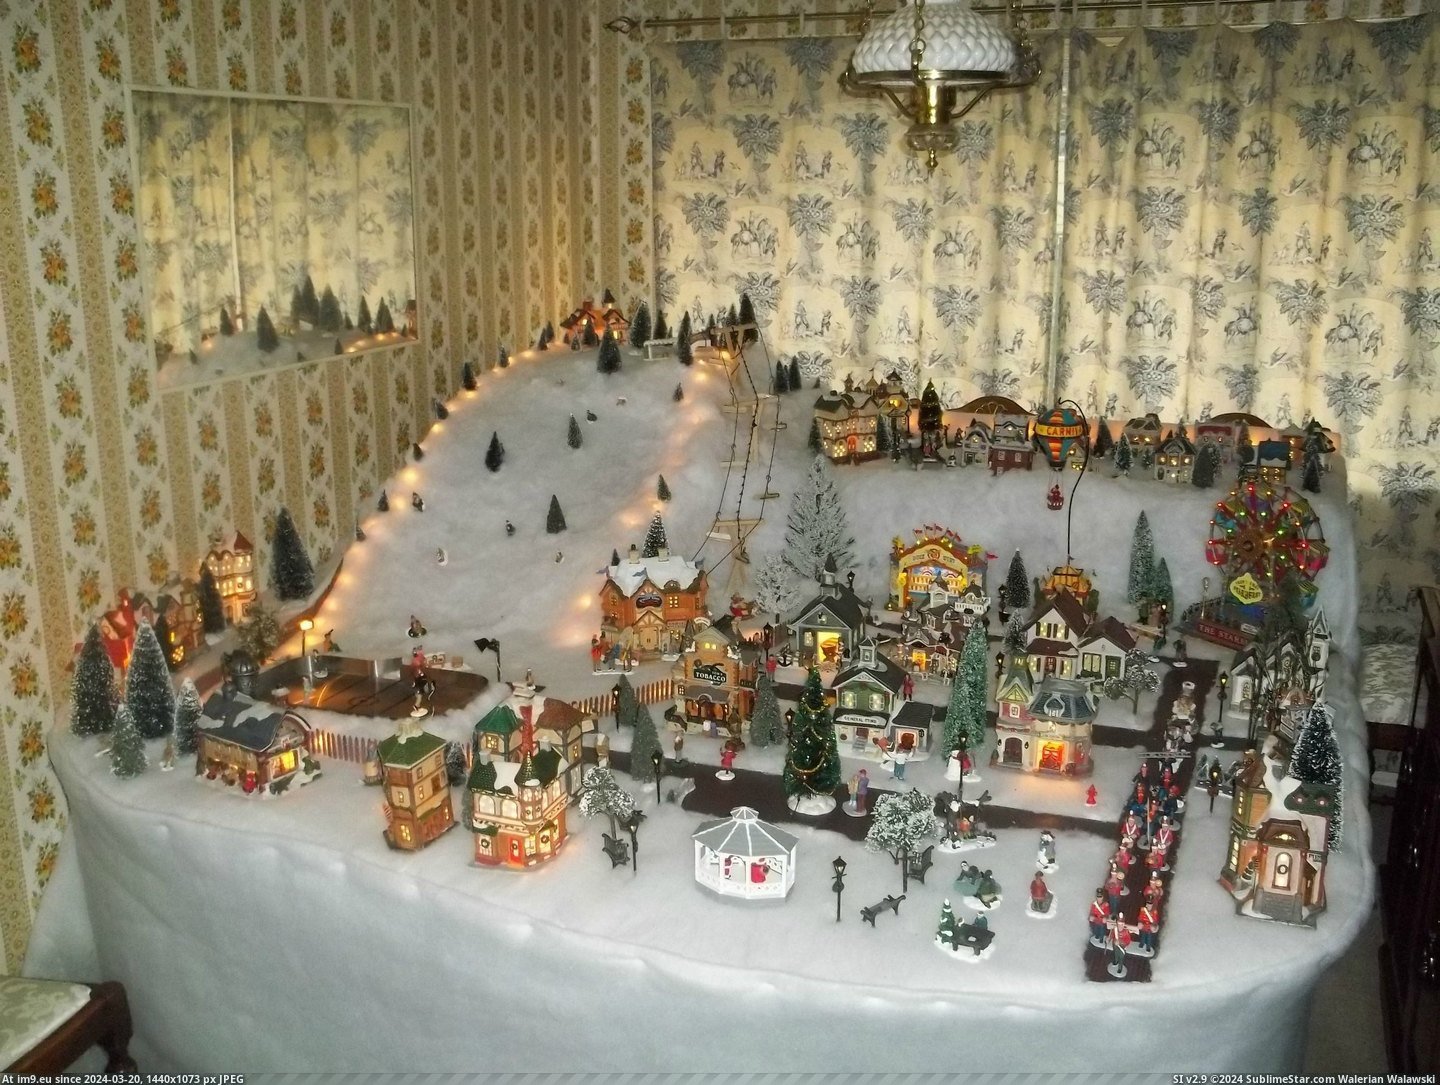 #Wife #Christmas #She #Village #Hobbies #How #Get #Wanted [Pics] The wife said she wanted a Christmas village, she should know how serious I get with hobbies. Pic. (Изображение из альбом My r/PICS favs))